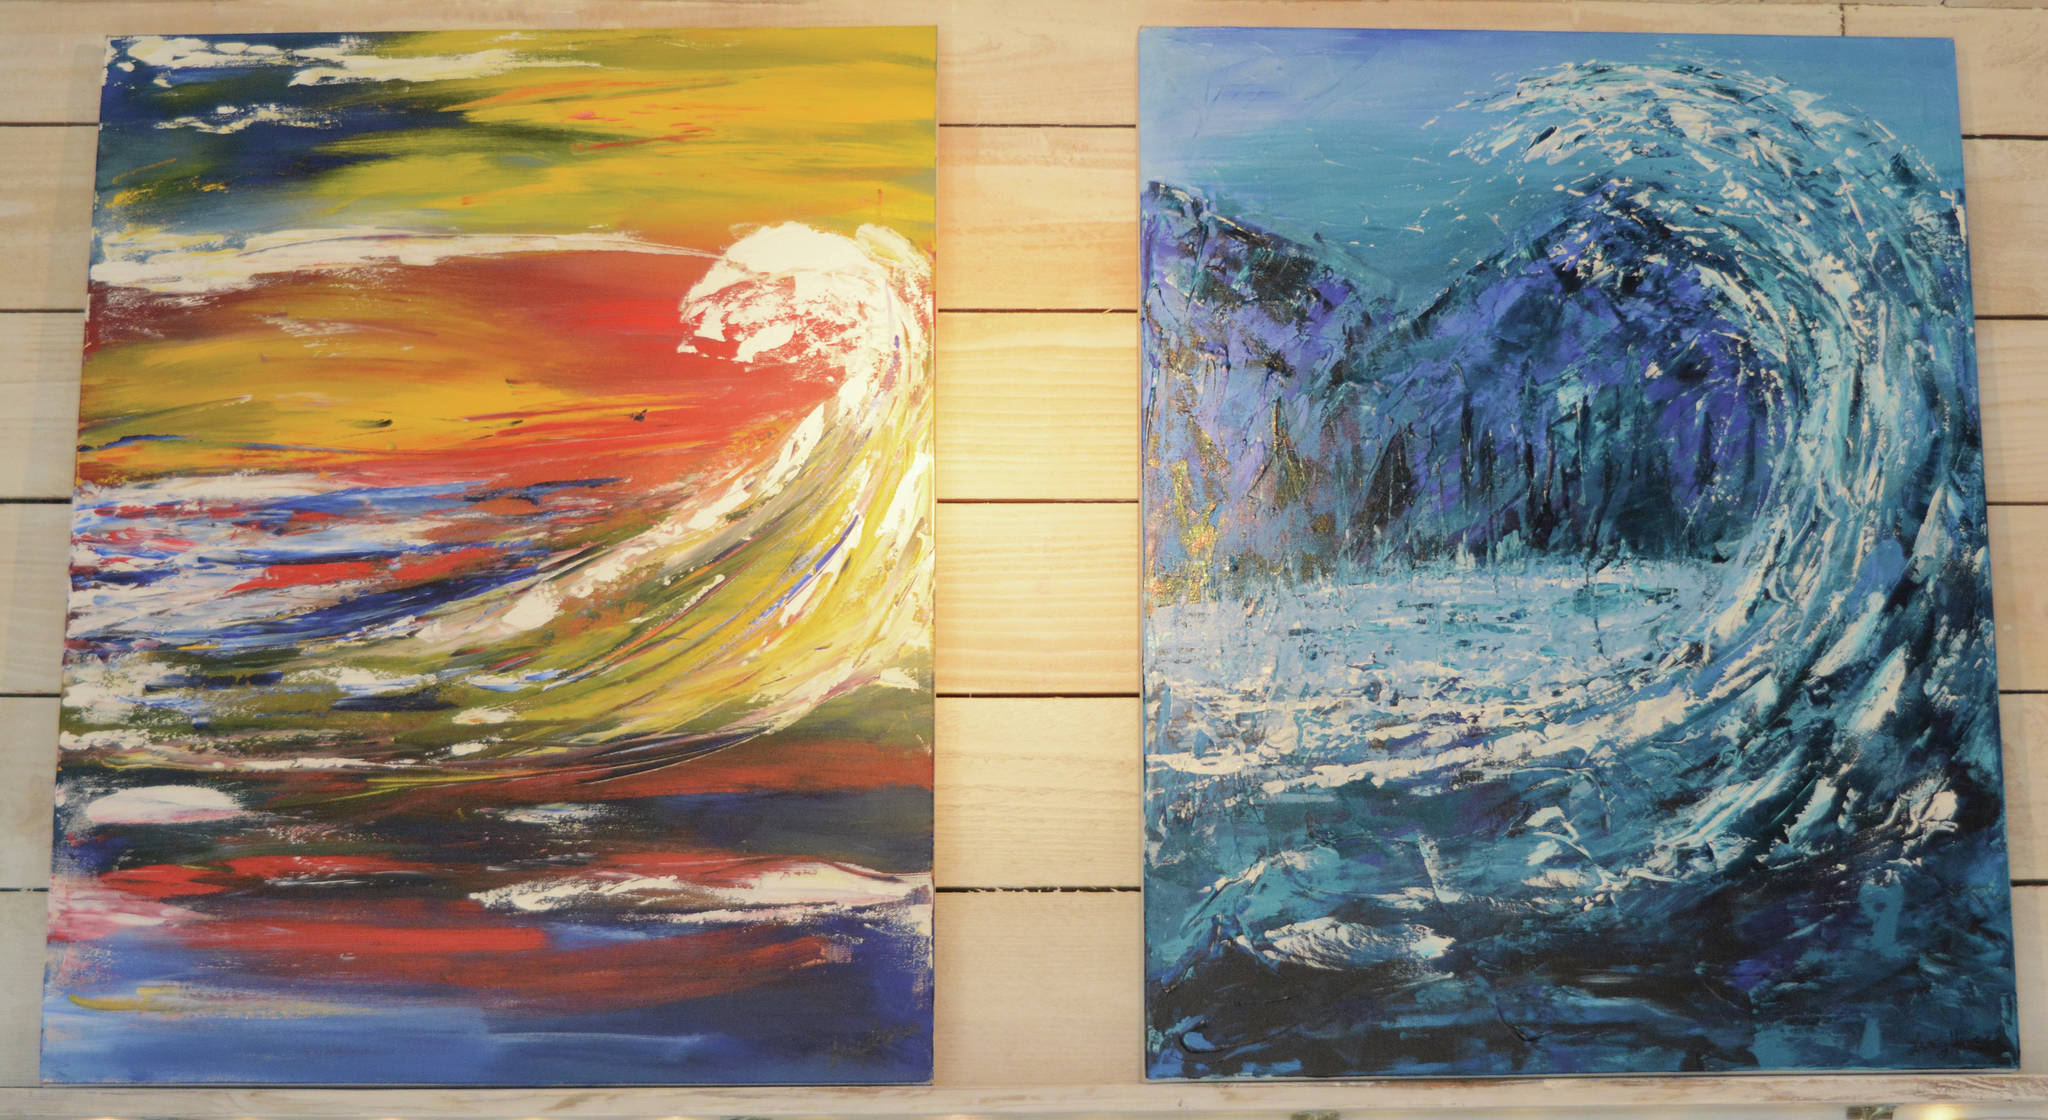 Two of Tracy Hansen’s more recent paintings, “Waves of Emotion: Anxiety,” left, and “Waves of Emotion: Peace,” right, are on display Tuesday, Aug. 11, 2021, at her shop, 59 North, in Homer, Alaska. (Photo by Michael Armstrong/Homer News)